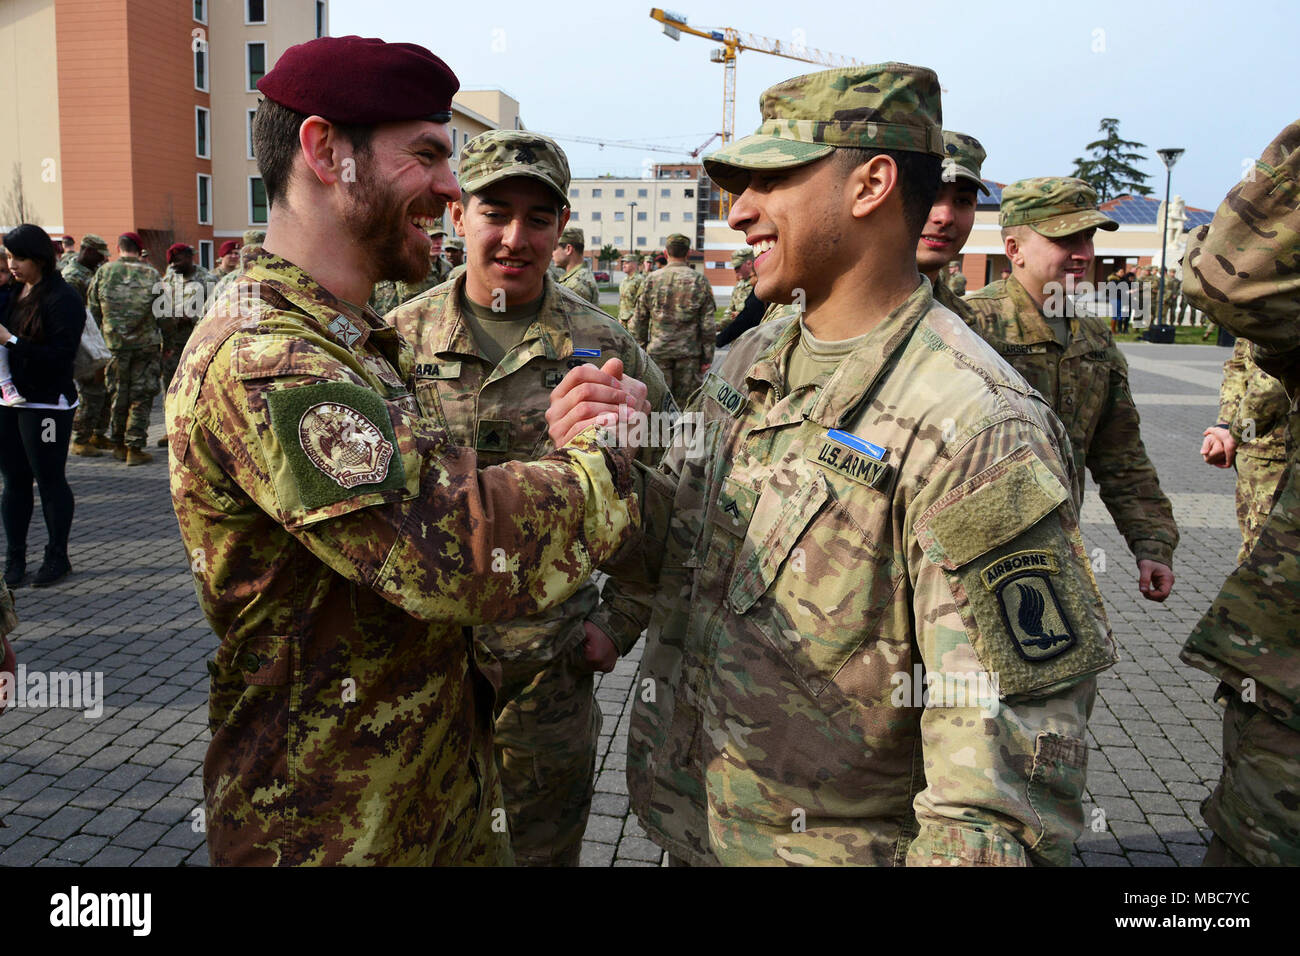 An Italian Army Soldier (left) and a U.S. Army Paratrooper assigned to the 173rd Airborne Brigade (right), say goodbye during the Expert Infantryman Badge (EIB) ceremony at Caserma Del Din, Vicenza, Italy, 15 Feb. 2018. (U.S. Army Stock Photo